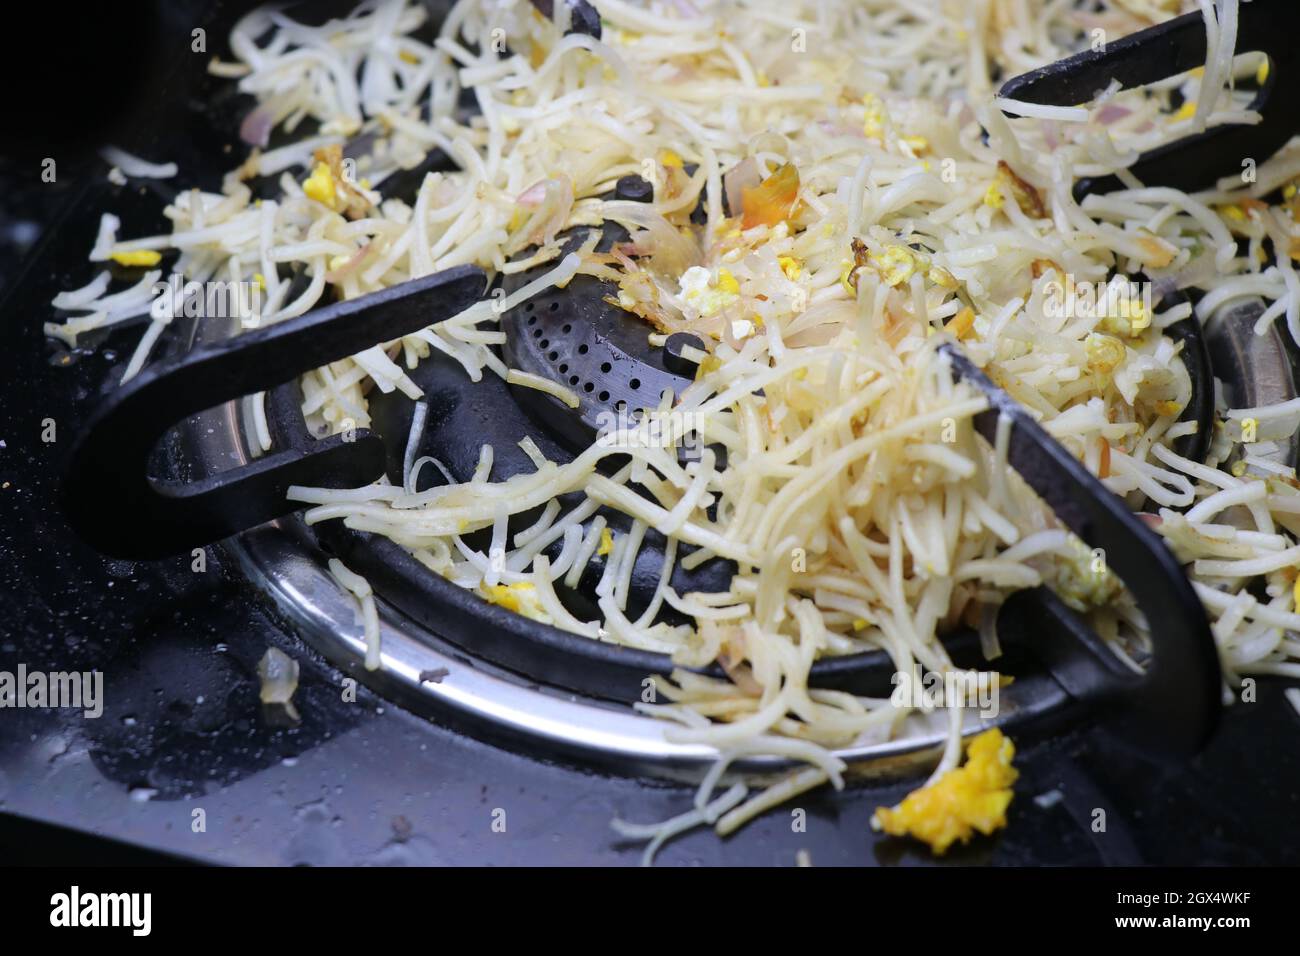 Noodles spilled on a stove top, food dropped on stove top while cooking with noodles all over gas burner Stock Photo